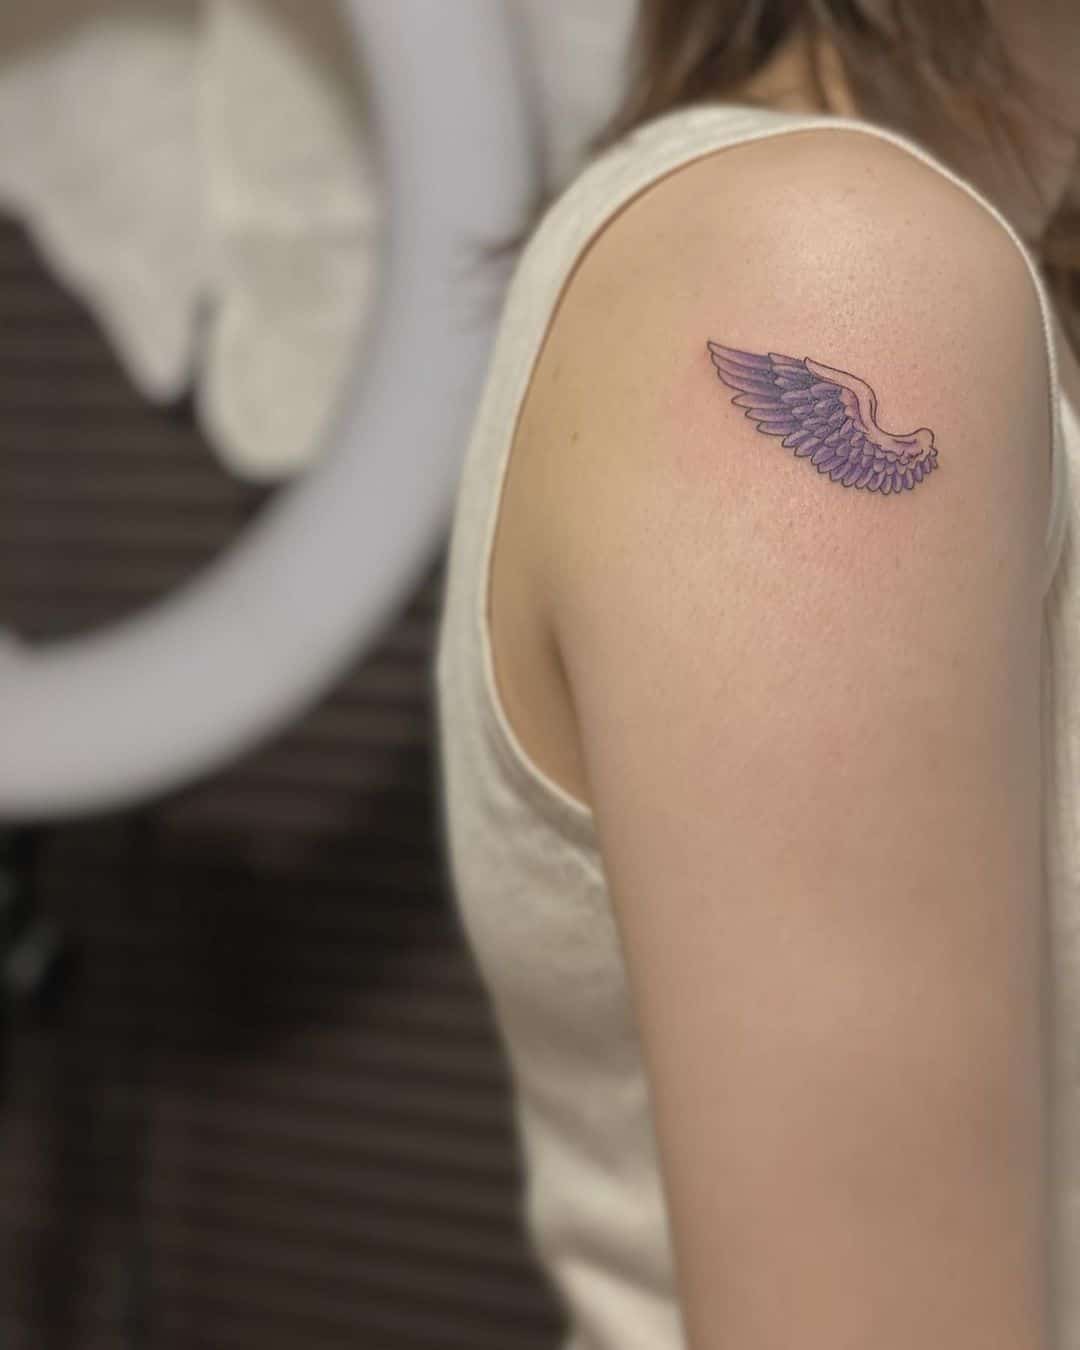 Small angel wing tattoos for females